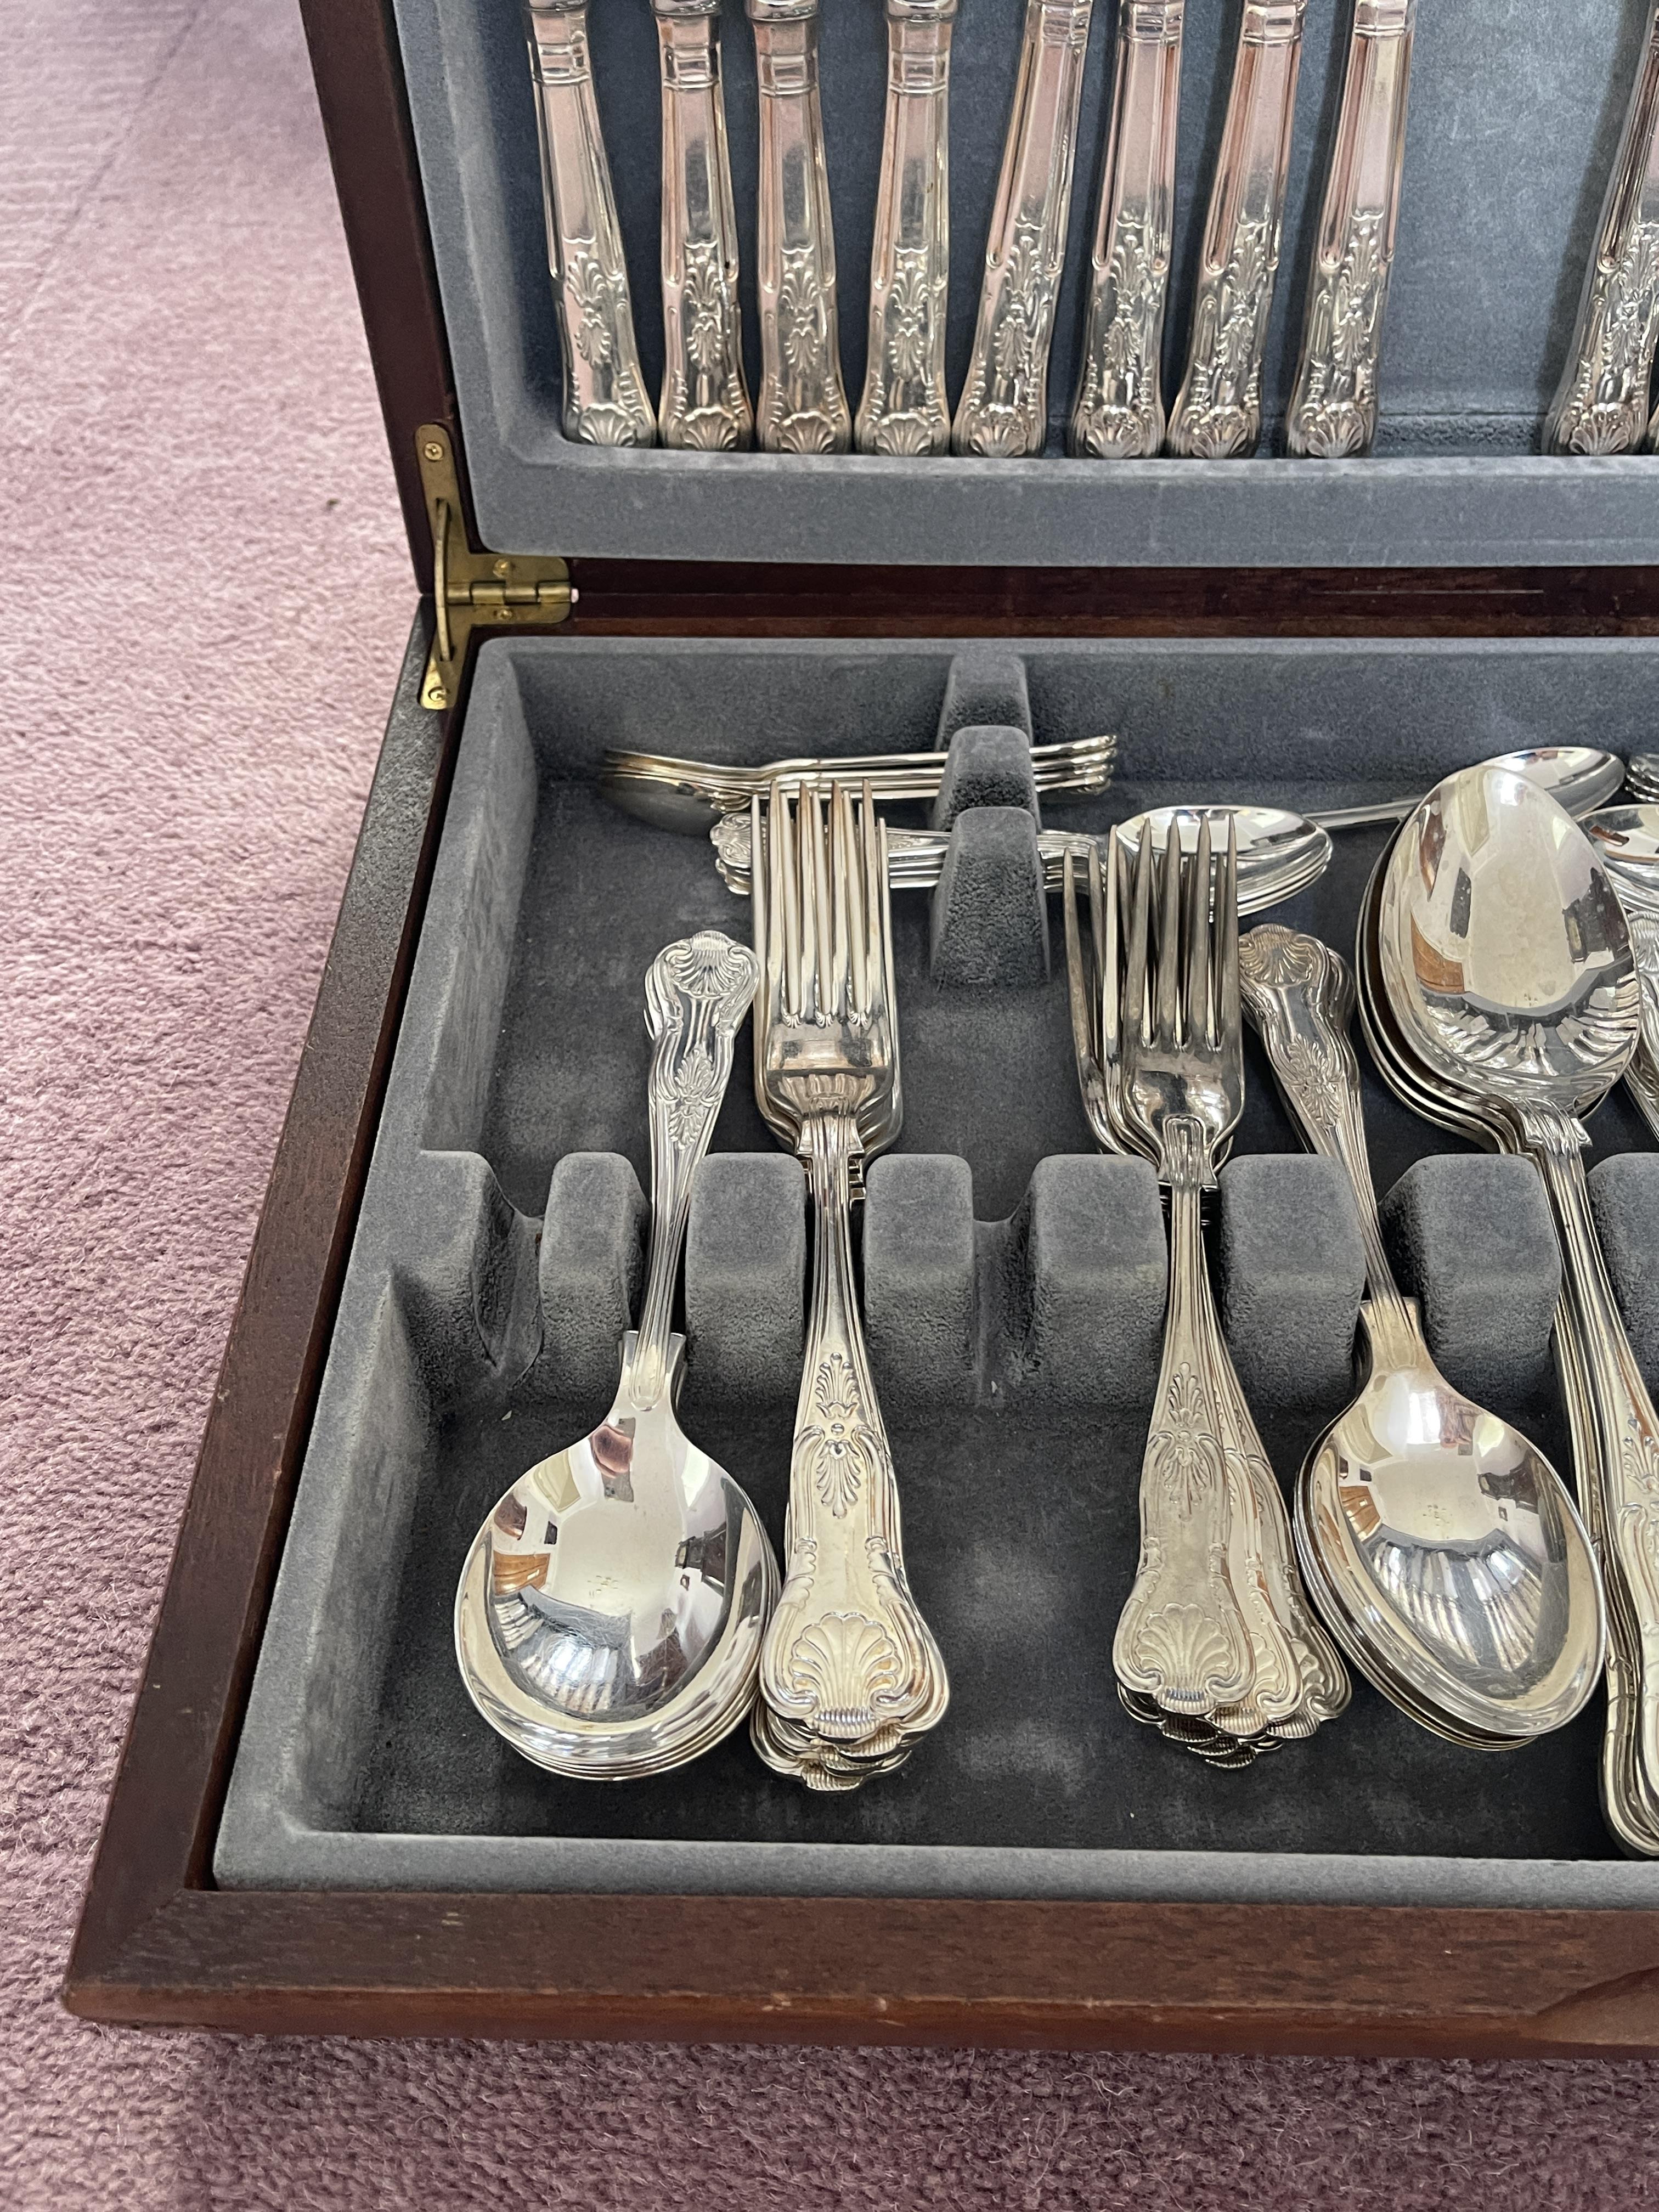 Cased Sheffield England Stainless Steel Cutlery Se - Image 5 of 10